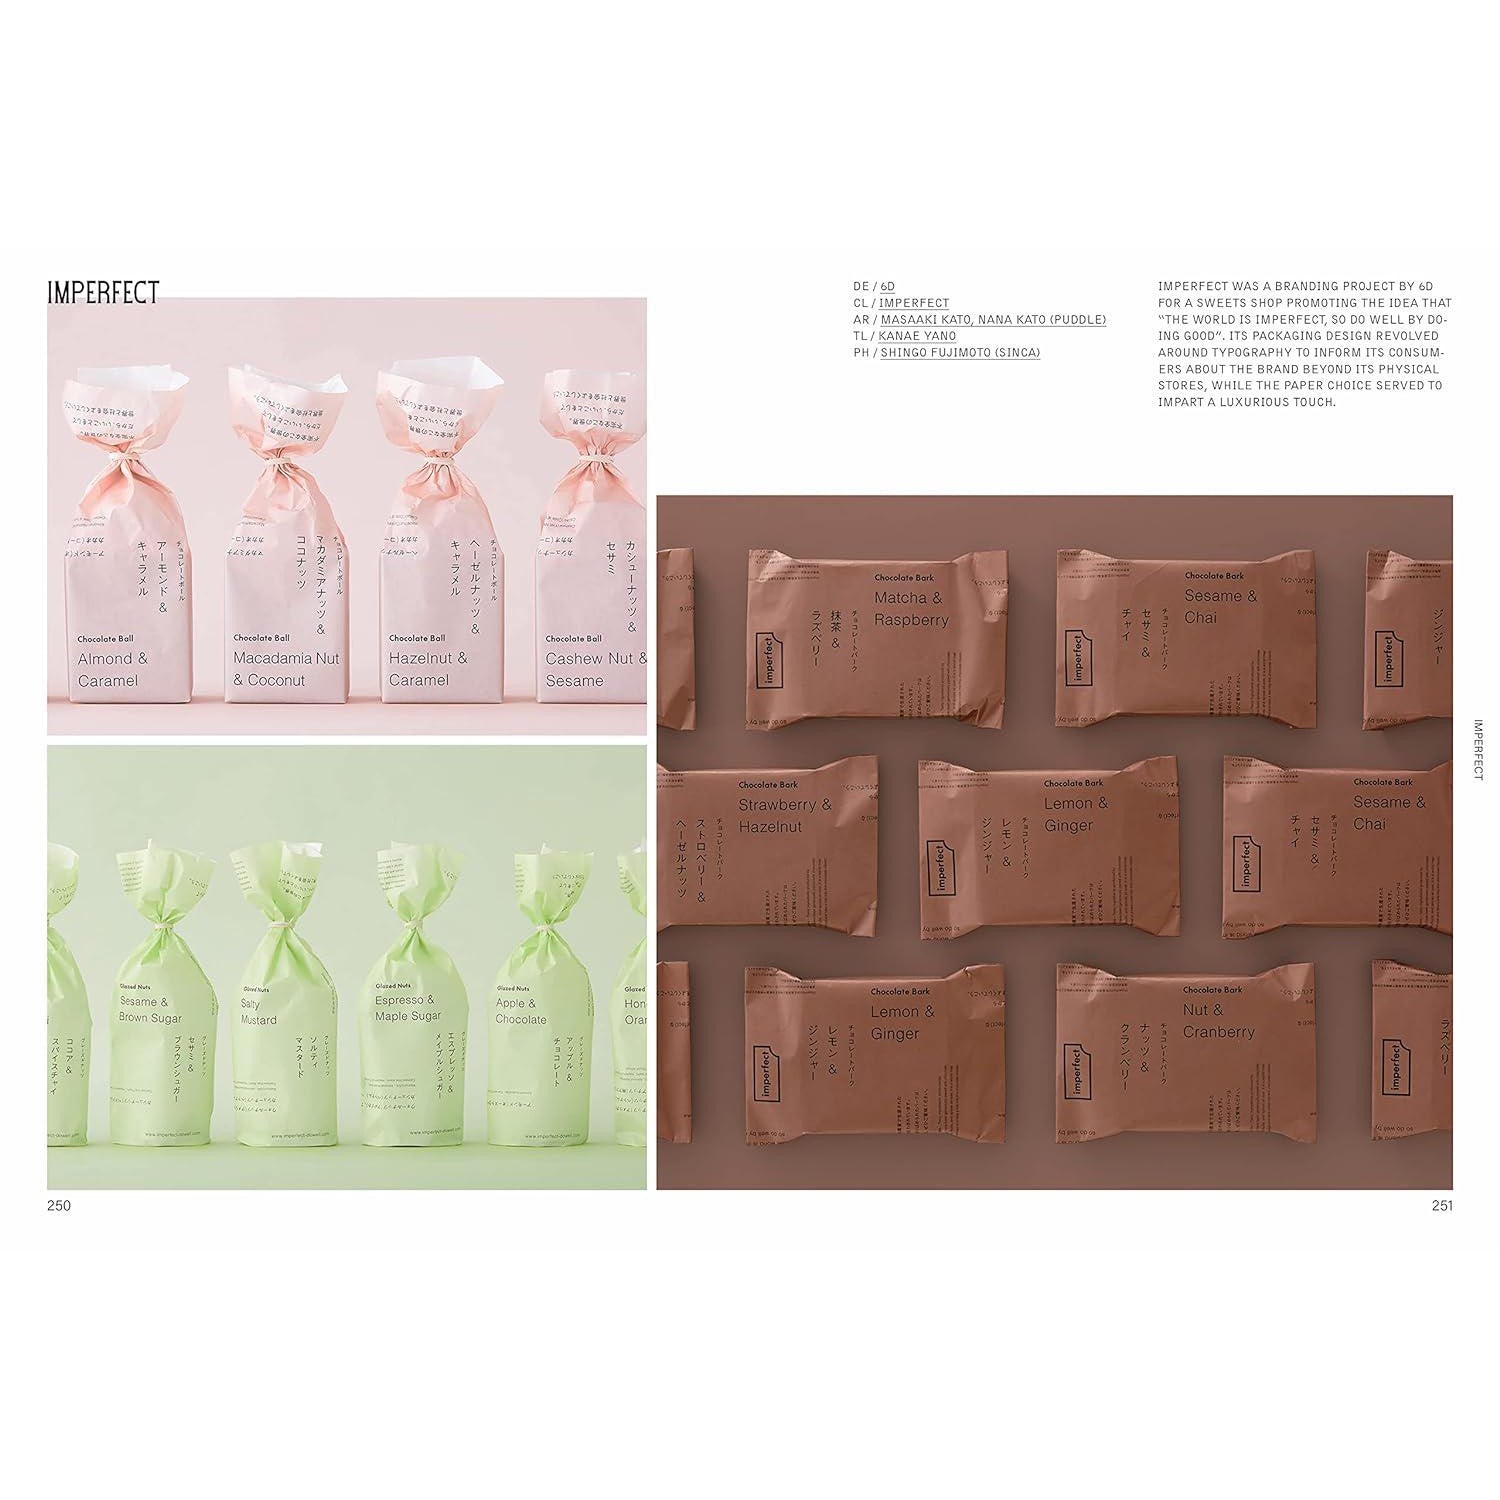 Packaged for Life: Chocolate Packaging design for everyday objects